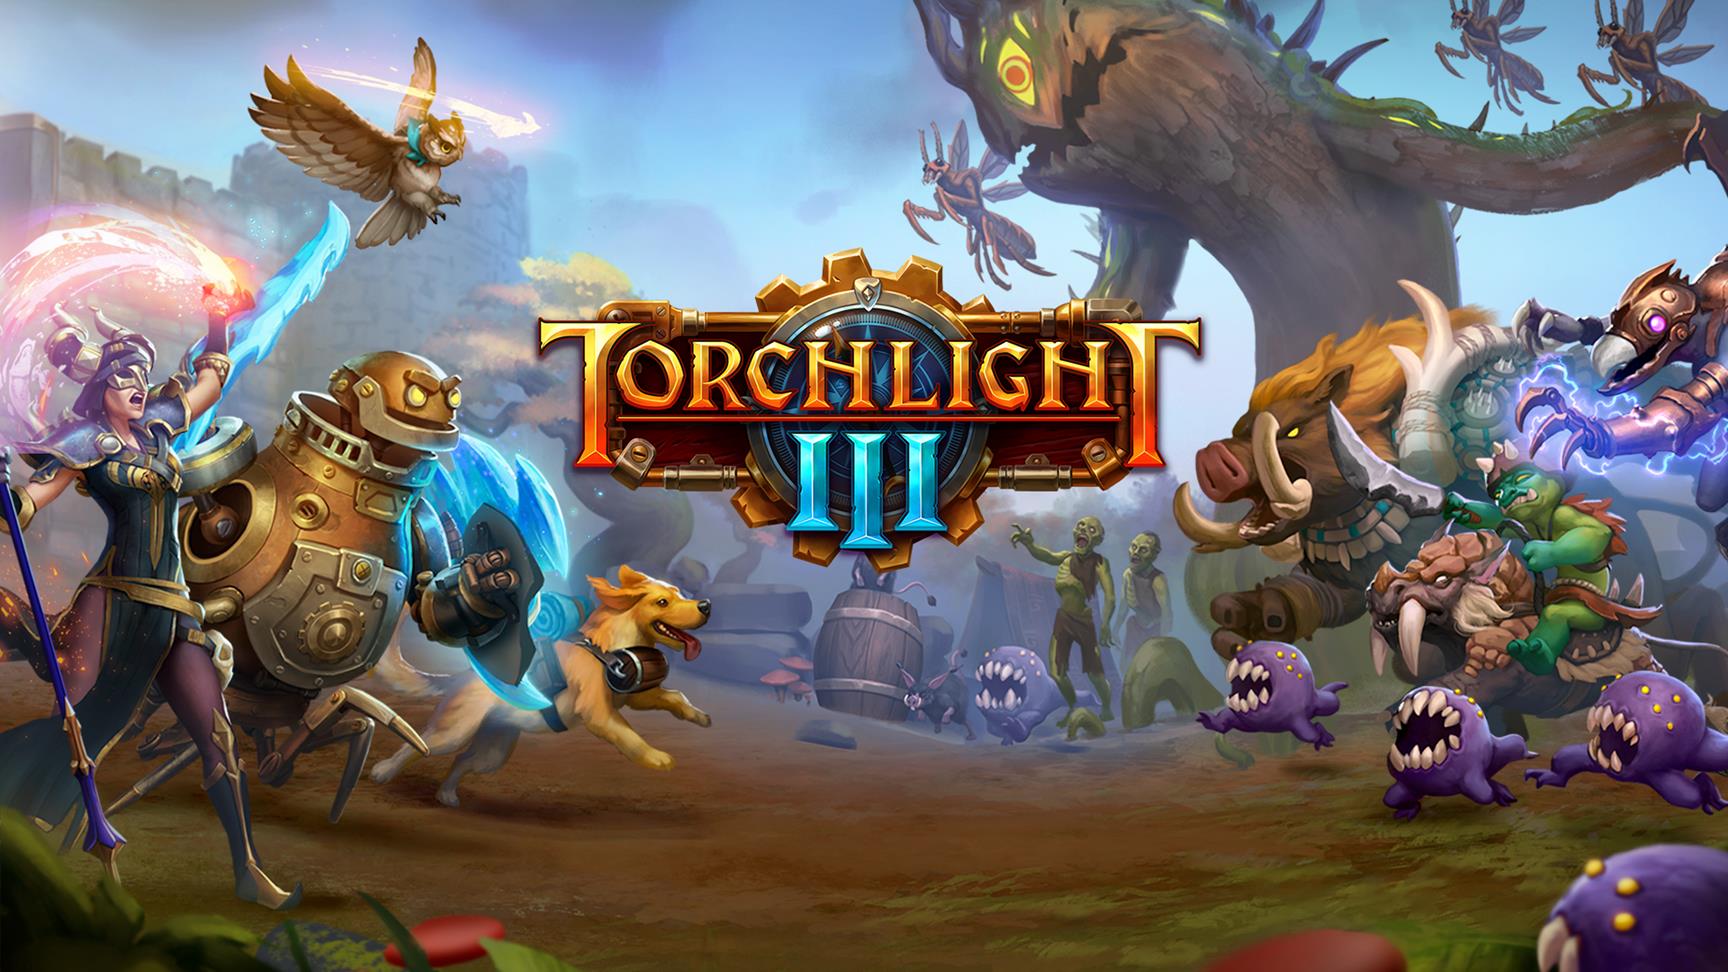 Image for Torchlight Frontiers renamed to Torchlight 3, no longer always-online or free-to-play